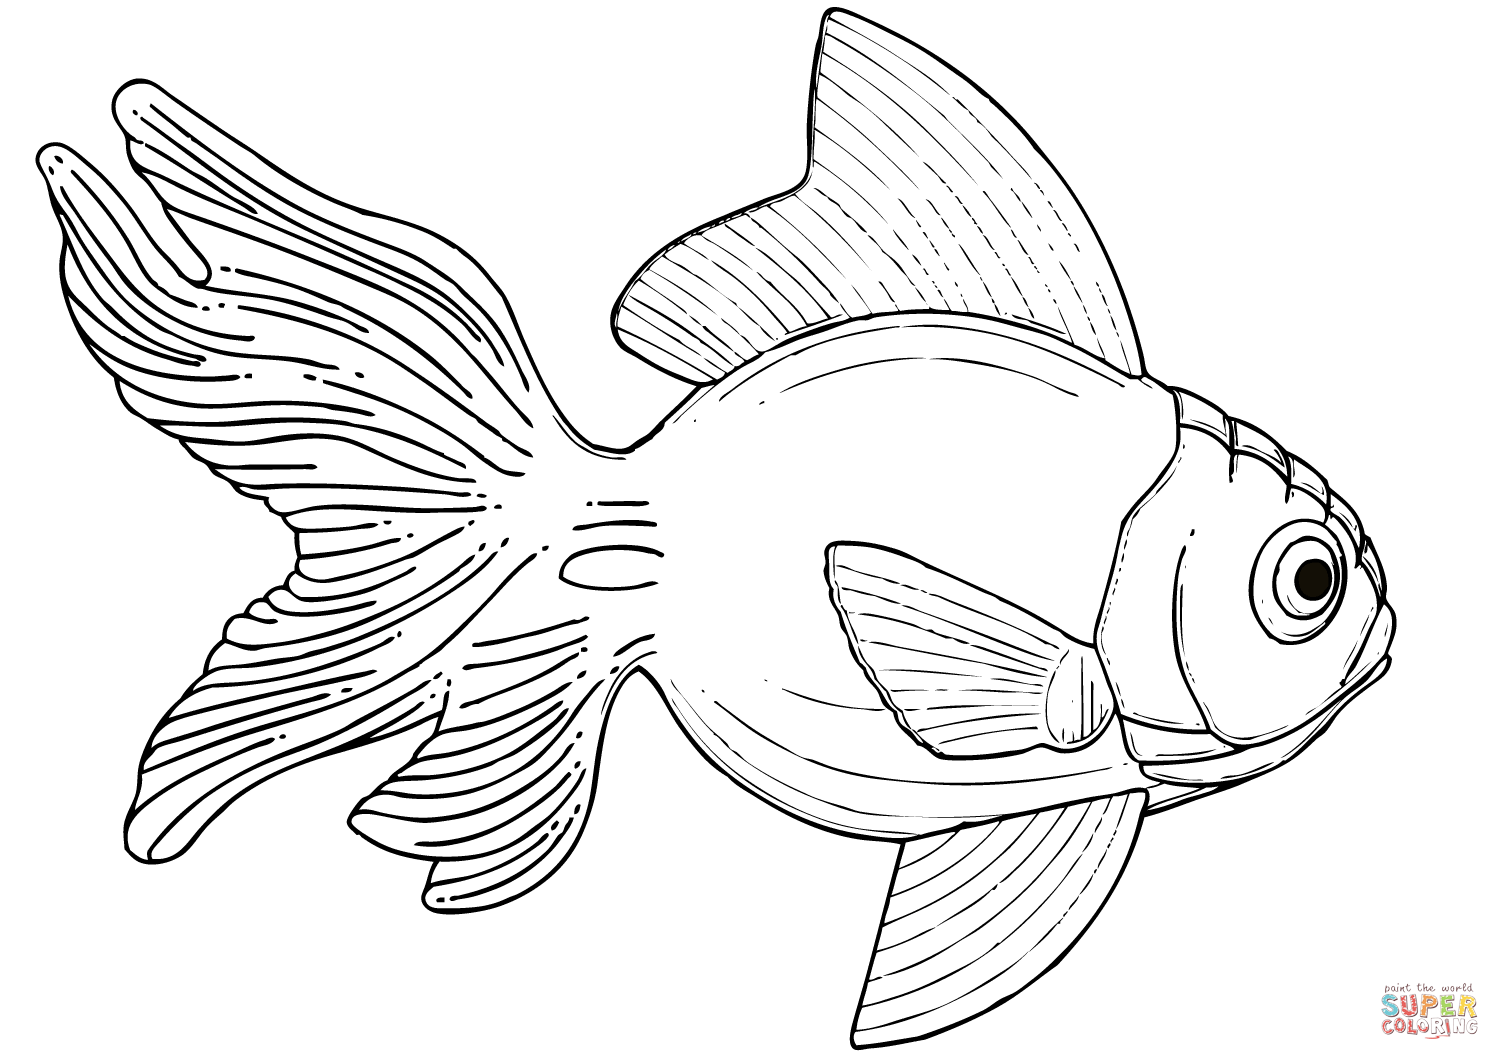 Goldfish coloring page | Free Printable Coloring Pages